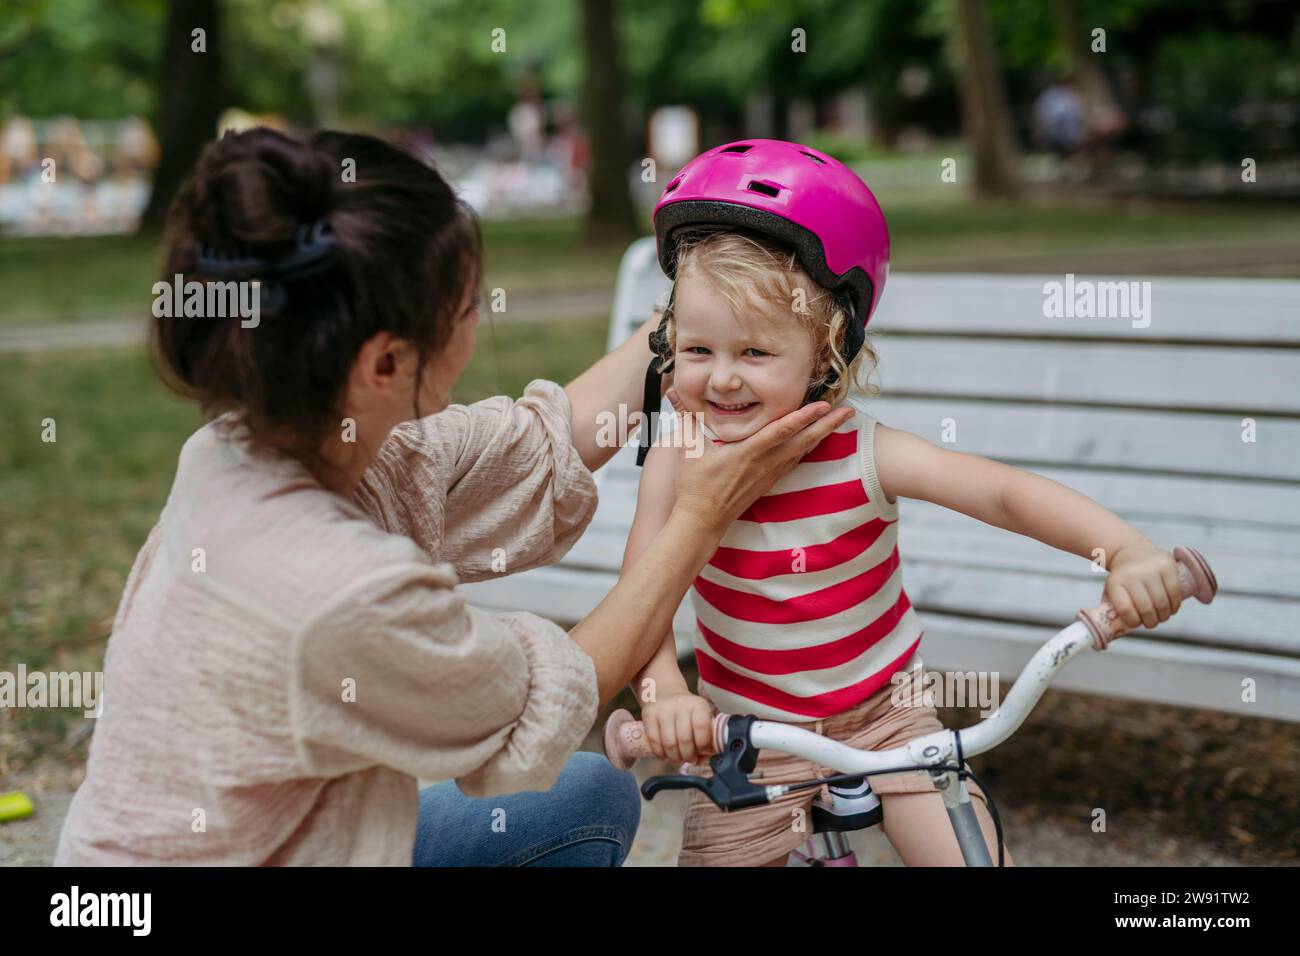 Mother putting safety helmet on little girl's head learning to ride a bike in the city park Stock Photo